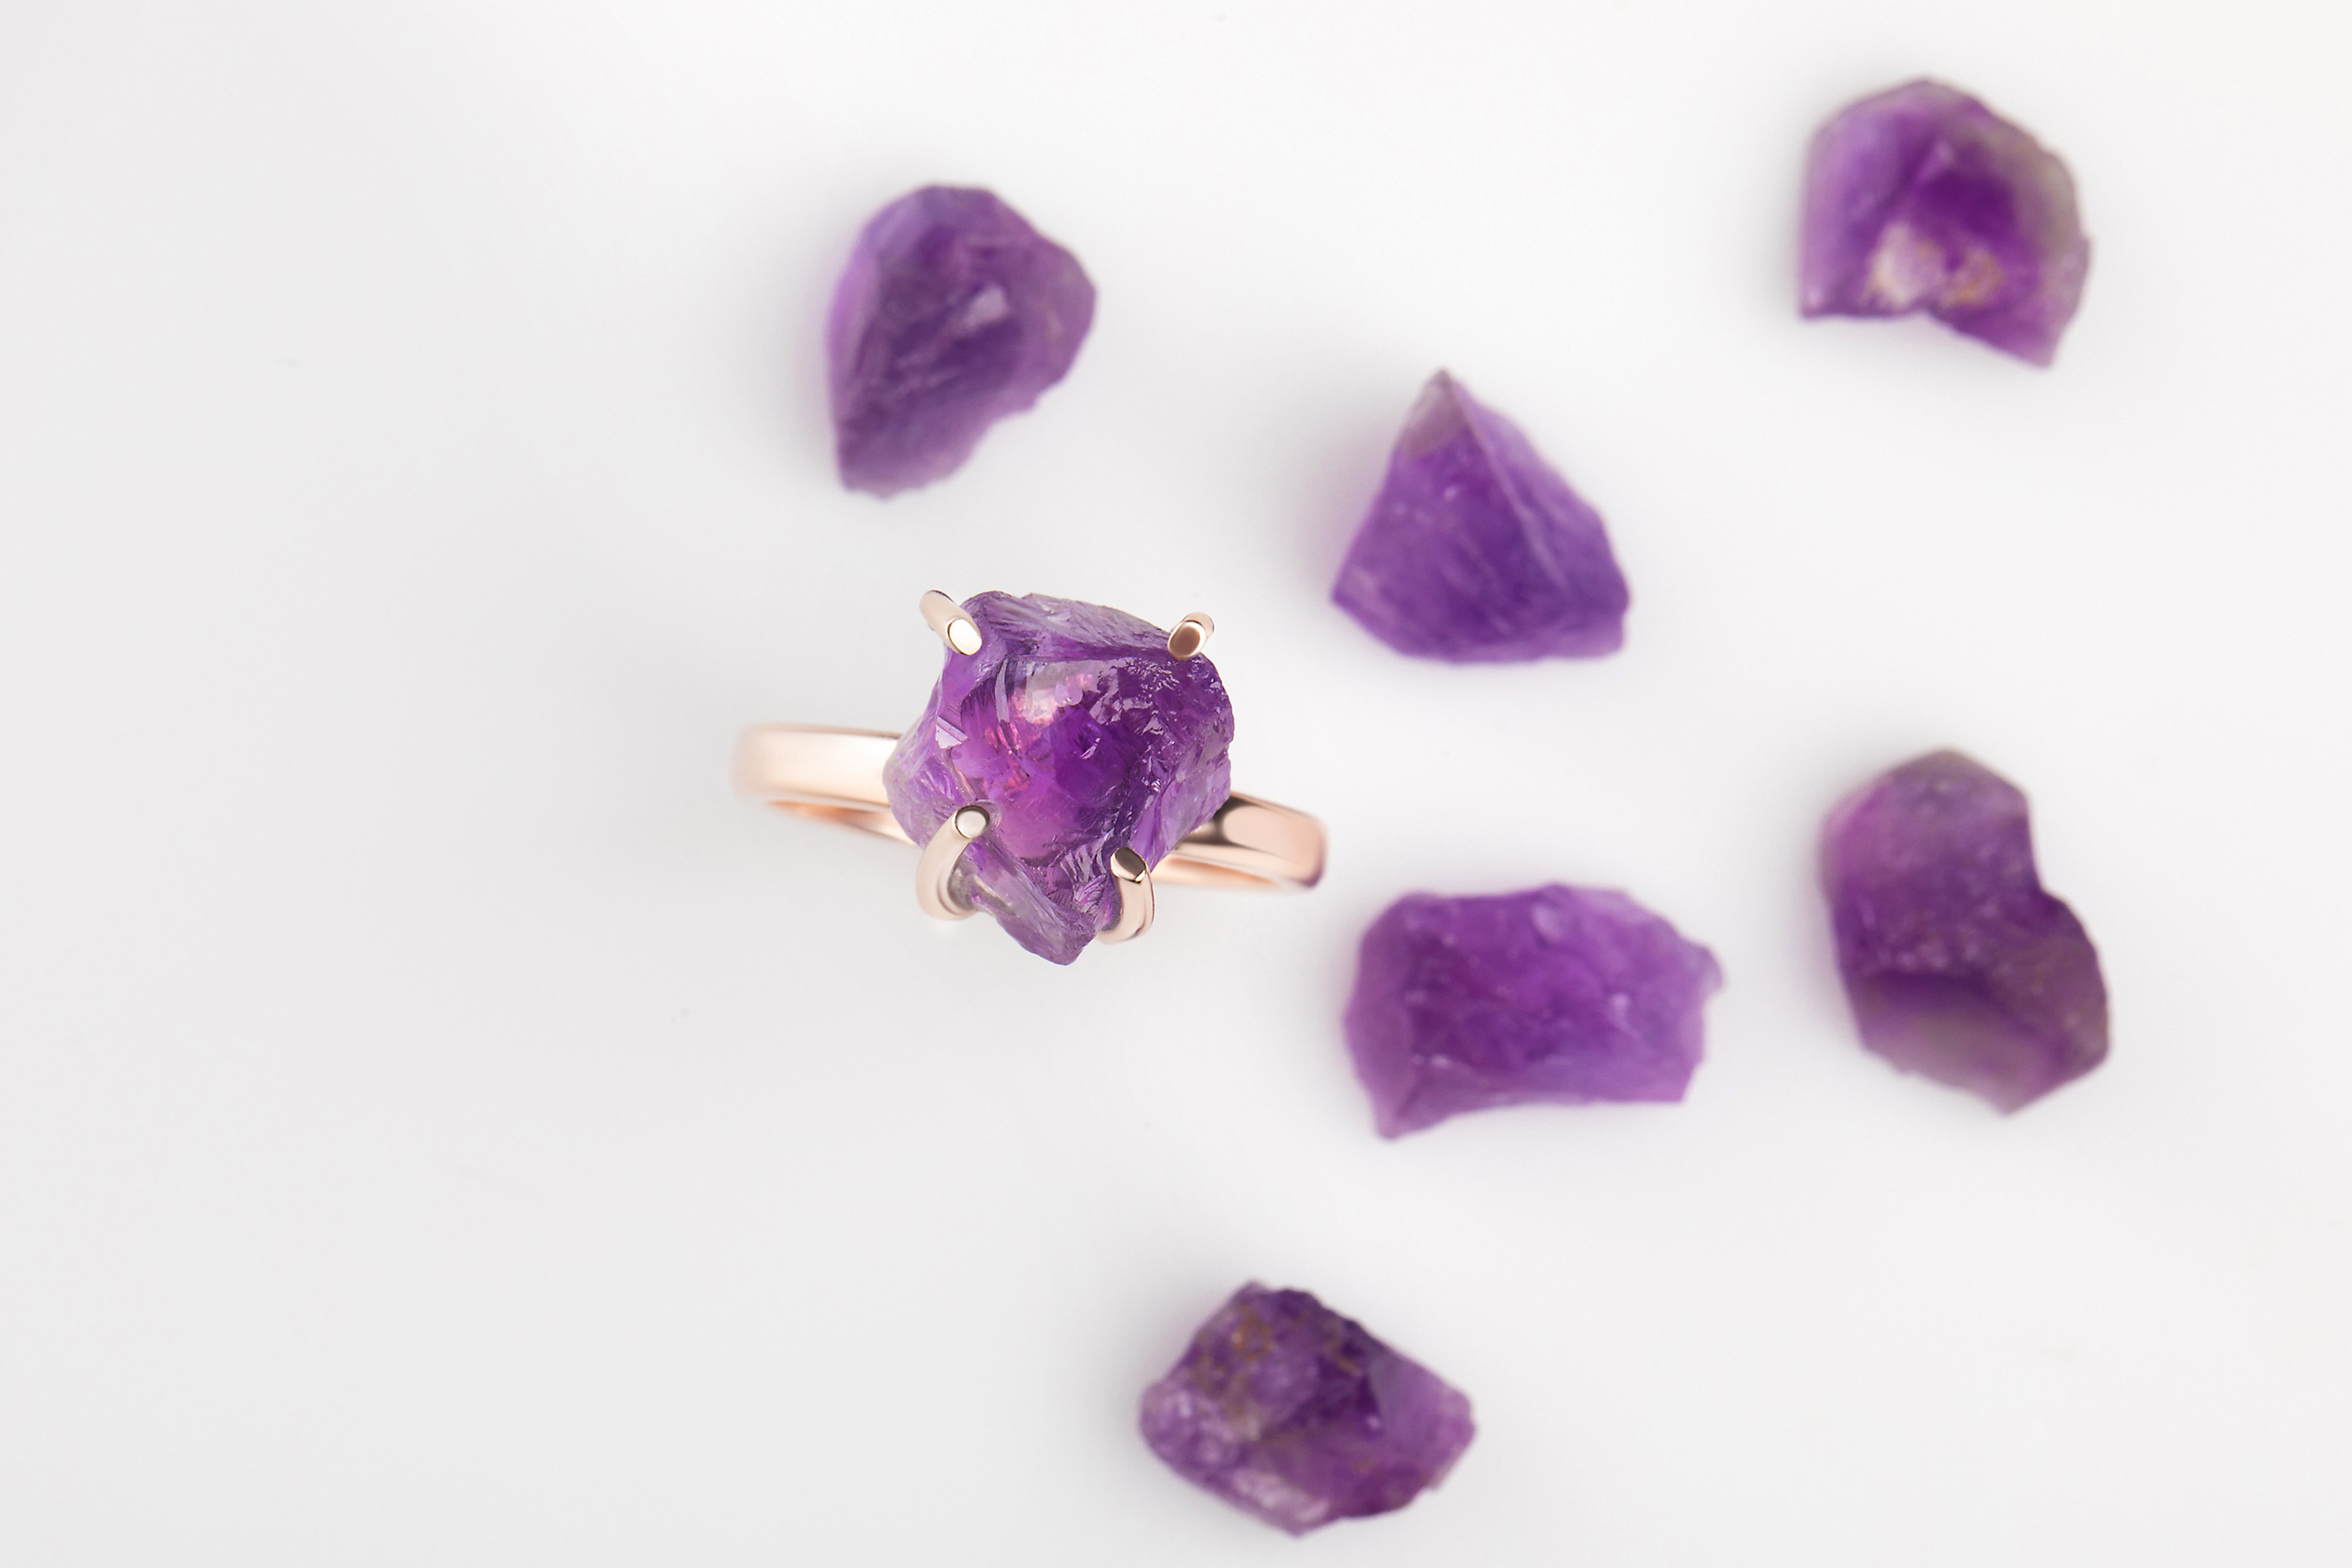 The Raw Crystal Ring - Amethyst is presented next to six raw Amethyst gemstones on a white surface.